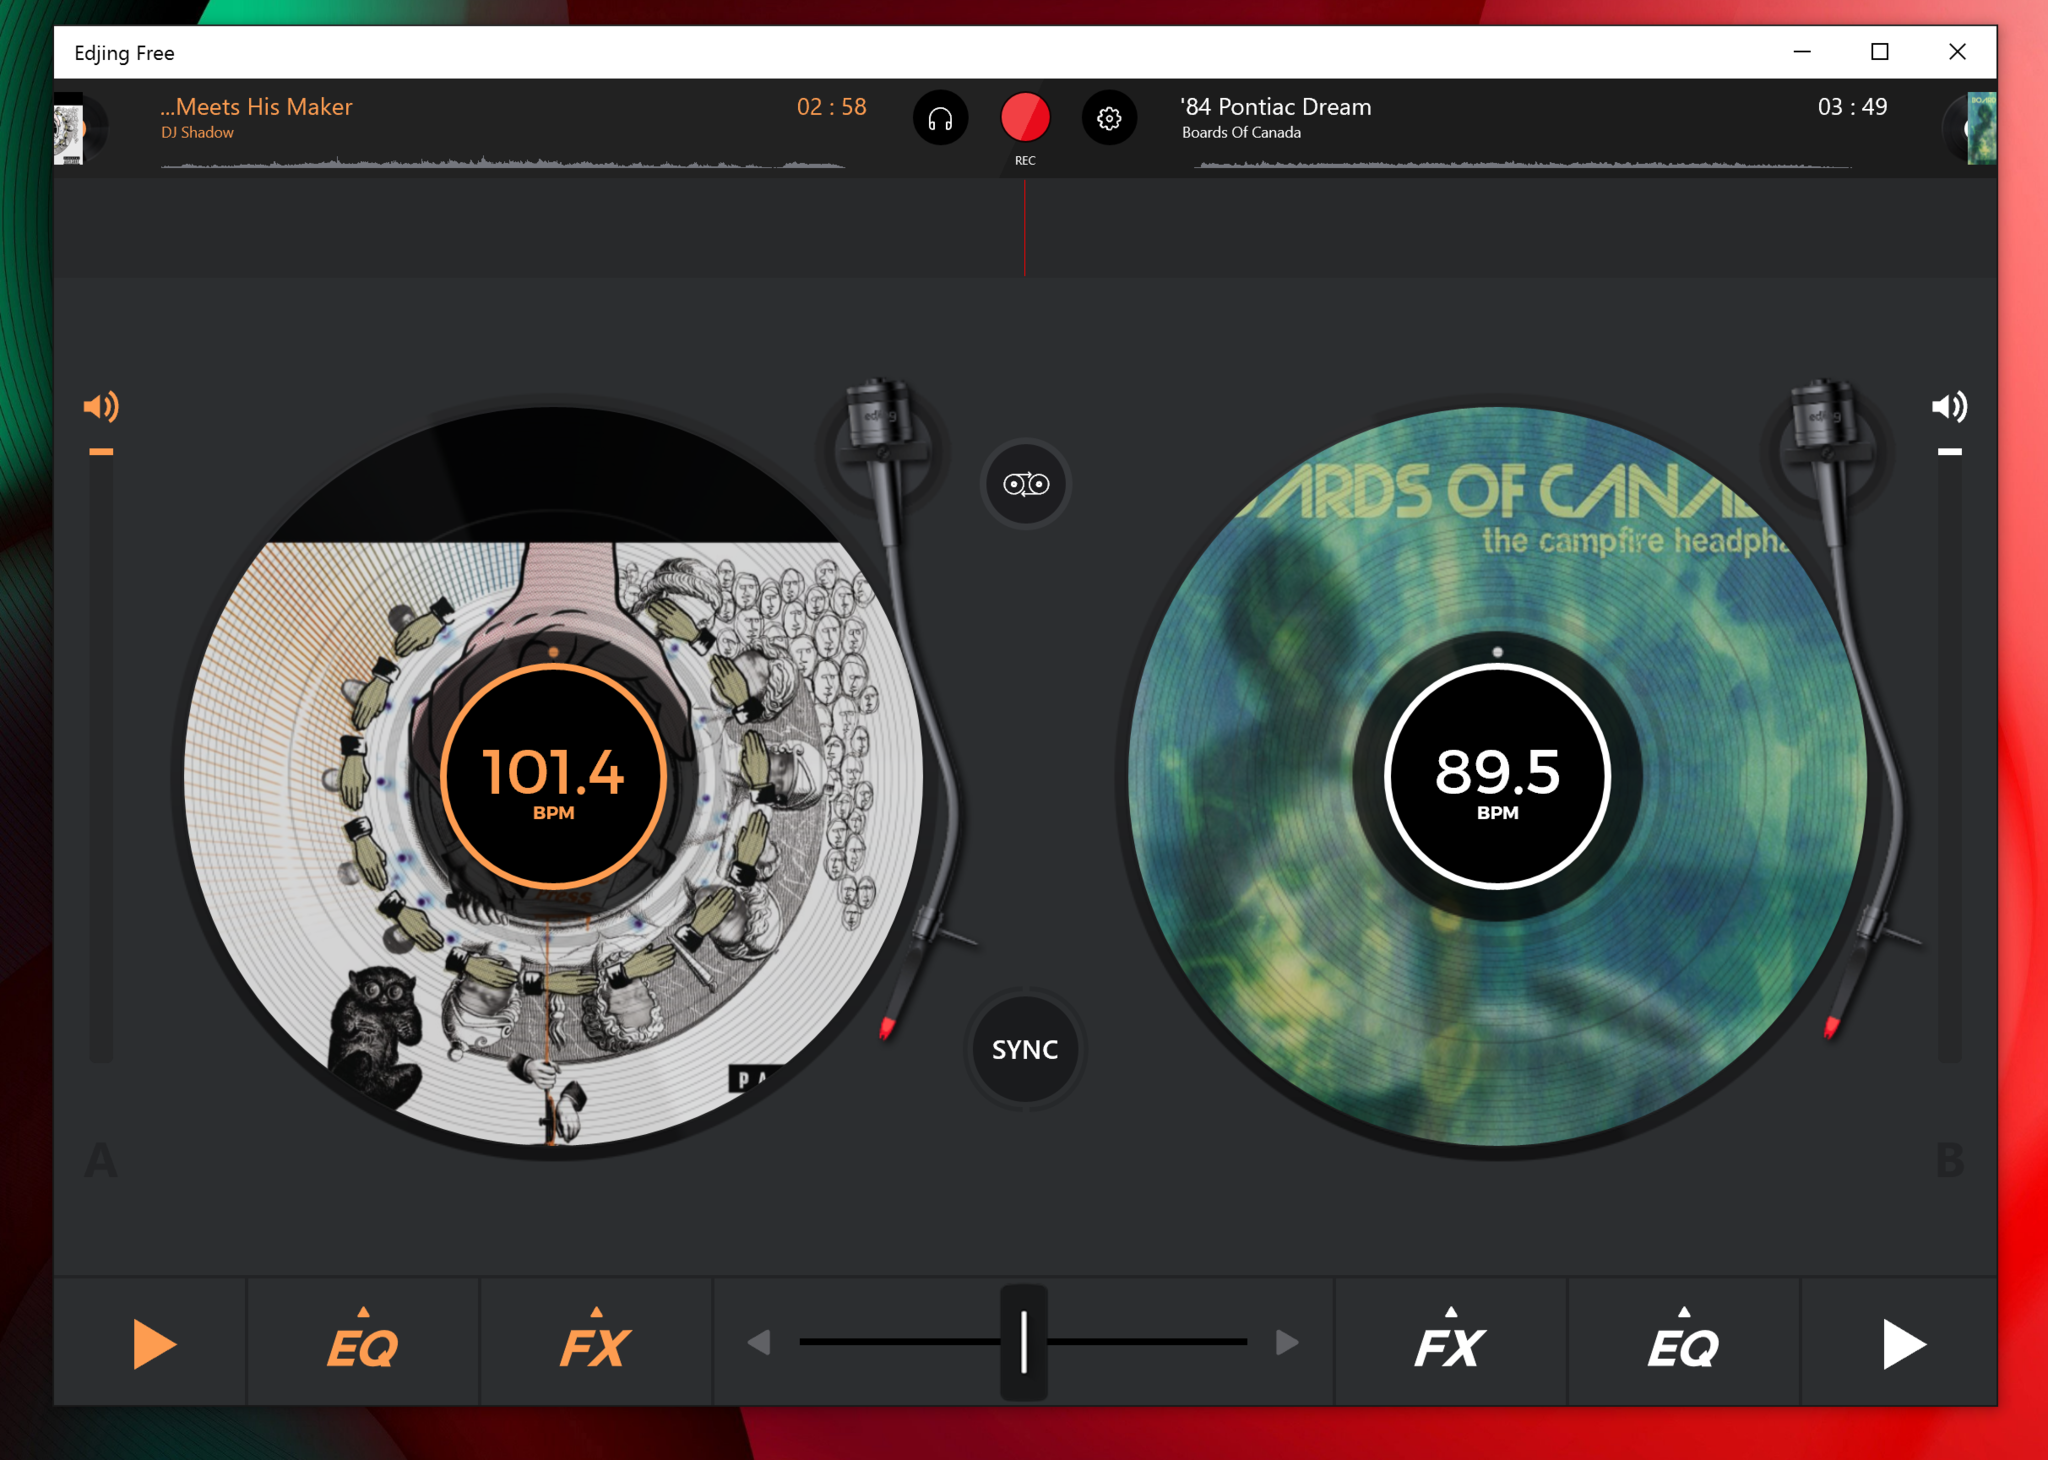 dj software free download for pc windows 10